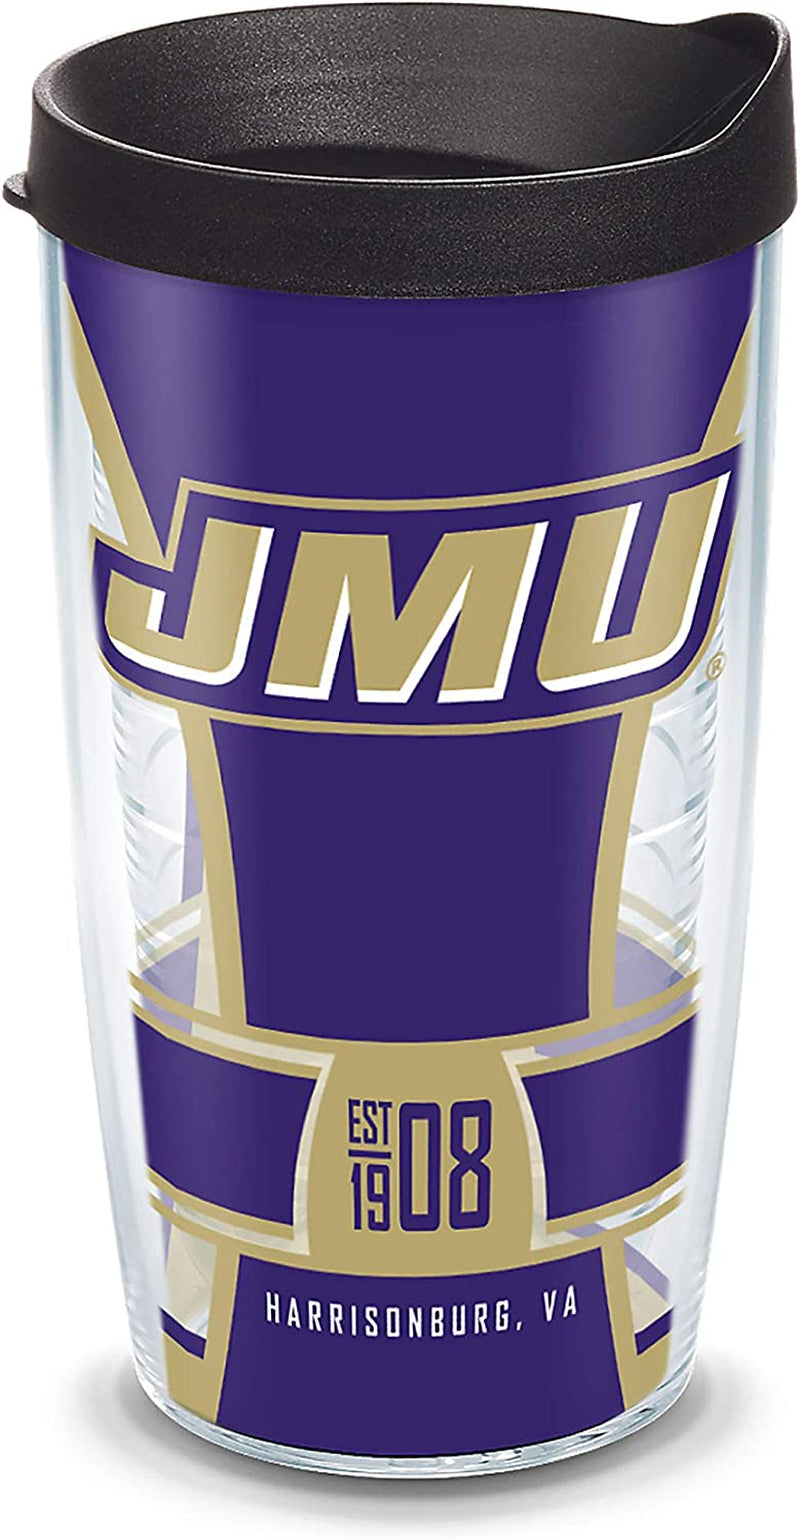 Tervis Made in USA Double Walled James Madison University JMU Dukes Insulated Tumbler Cup Keeps Drinks Cold & Hot, 24Oz - Black Lid, Primary Logo Home & Garden > Kitchen & Dining > Tableware > Drinkware Tervis Spirit 16oz - Black Lid 